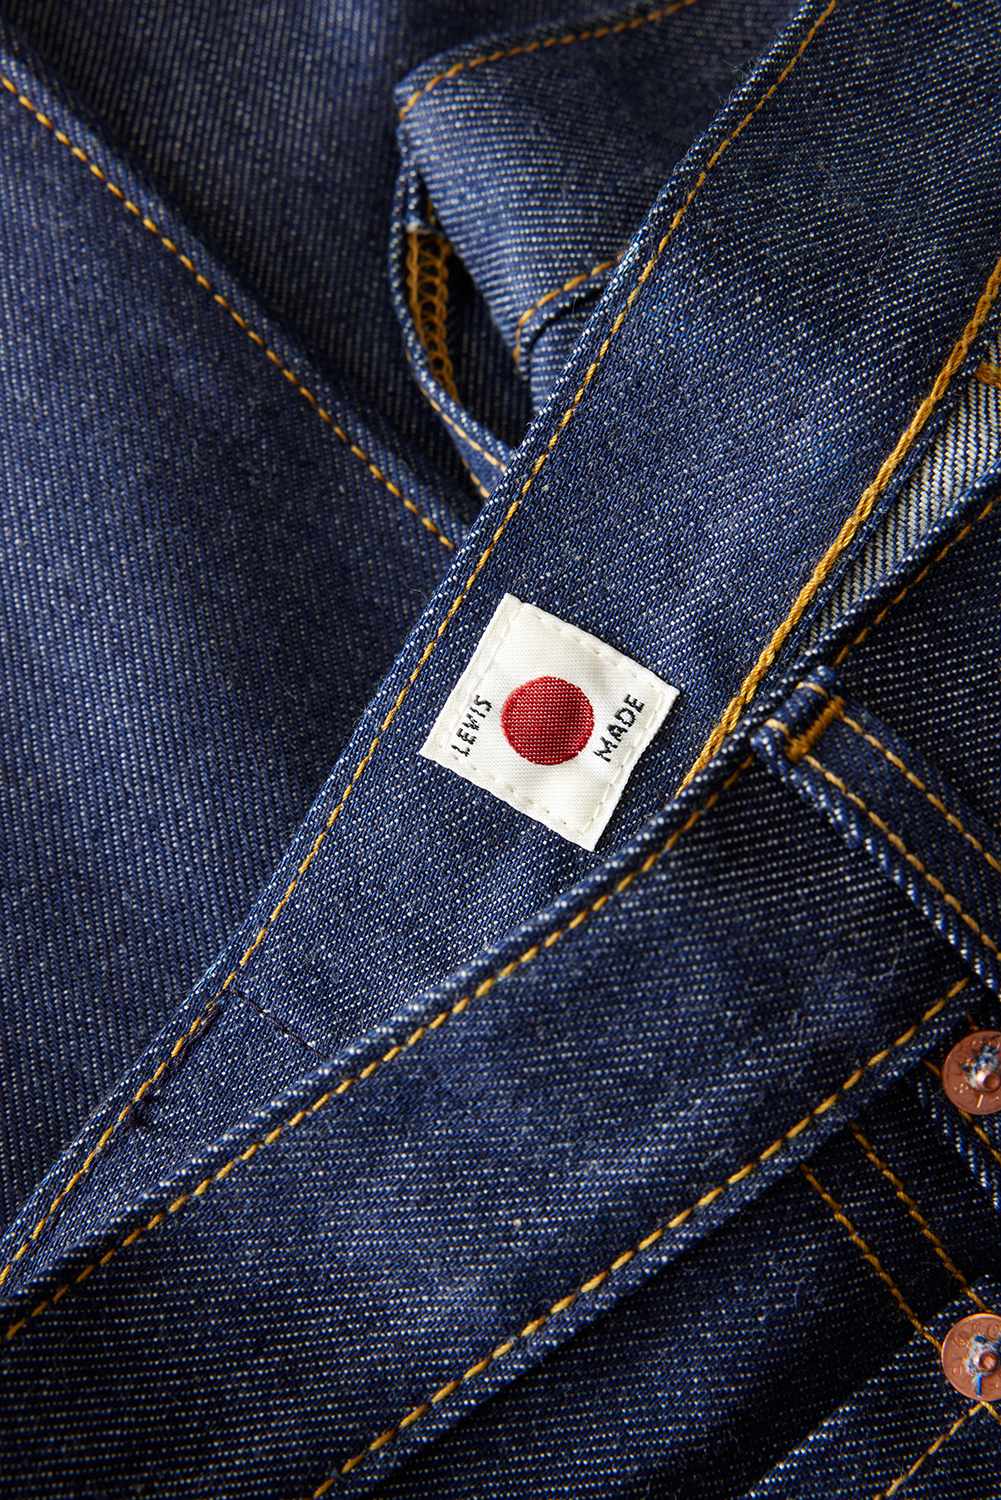 Levi's Made in Japan Jeans Are a Gorgeous Denim Patchwork